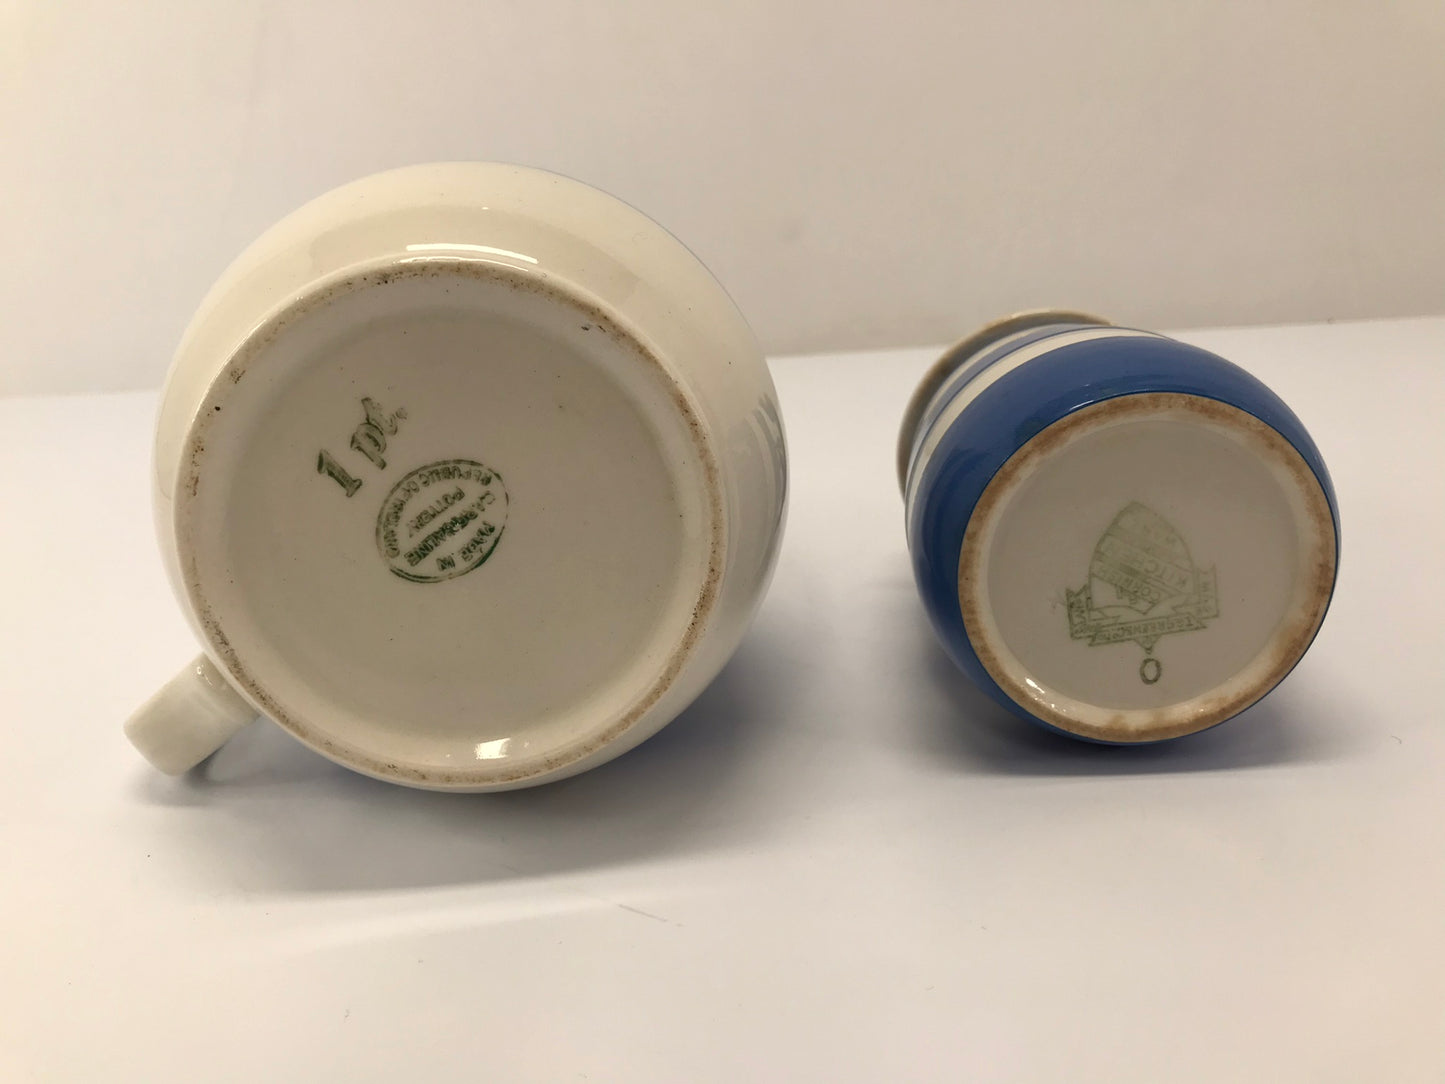 Antique Cornishware RARE Large Round Pottery Pepper Shaker With Similar Style Vintage Stipped Pottery Creamer Jug Sold Together